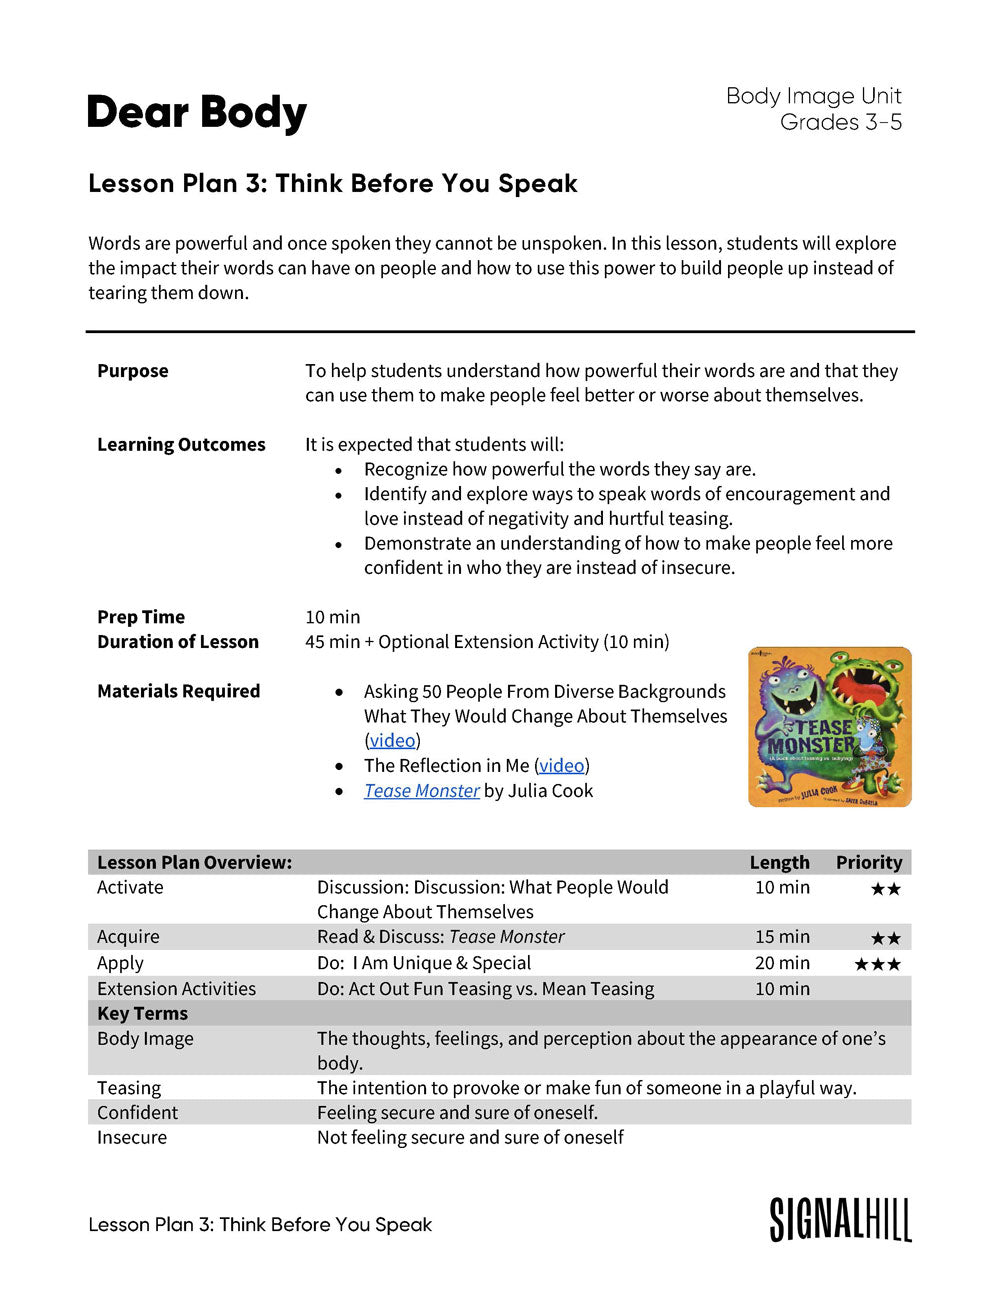 Lesson Plan 3: Think Before You Speak